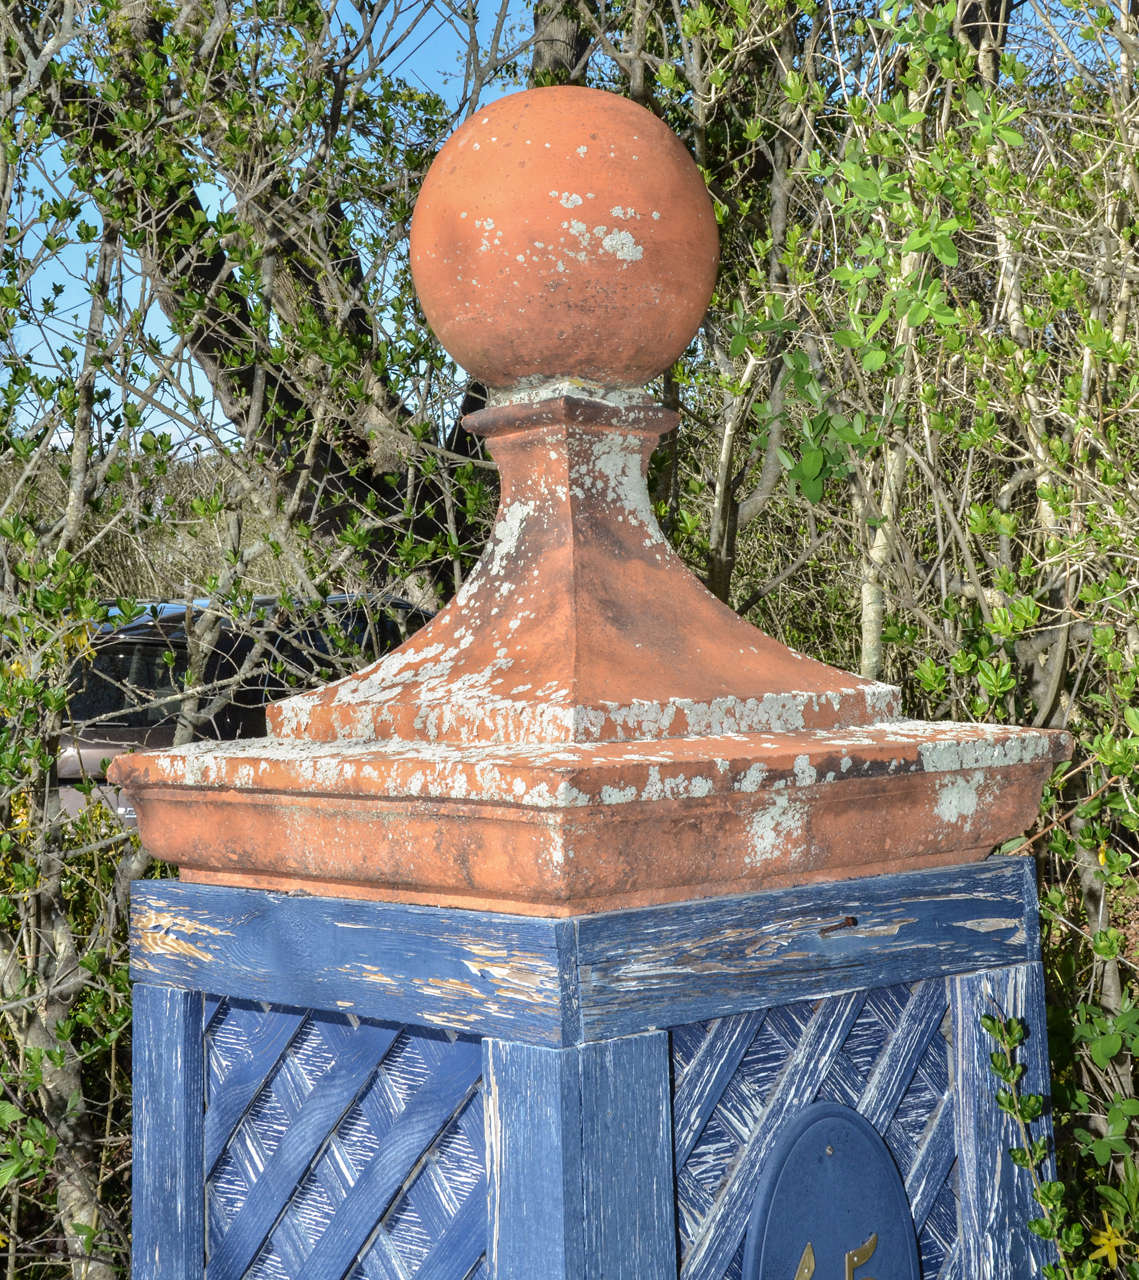 19th Cent. English Terra Cotta Ball Gatepost Finials. Comprised Of A Moulded Square Base With a Tapering Pedestal Supporting The Ball. The Finals Have Beautifully Aged Patina. Great For Entrance To A Driveway Or In A Garden. The Wooden Lattice Gate